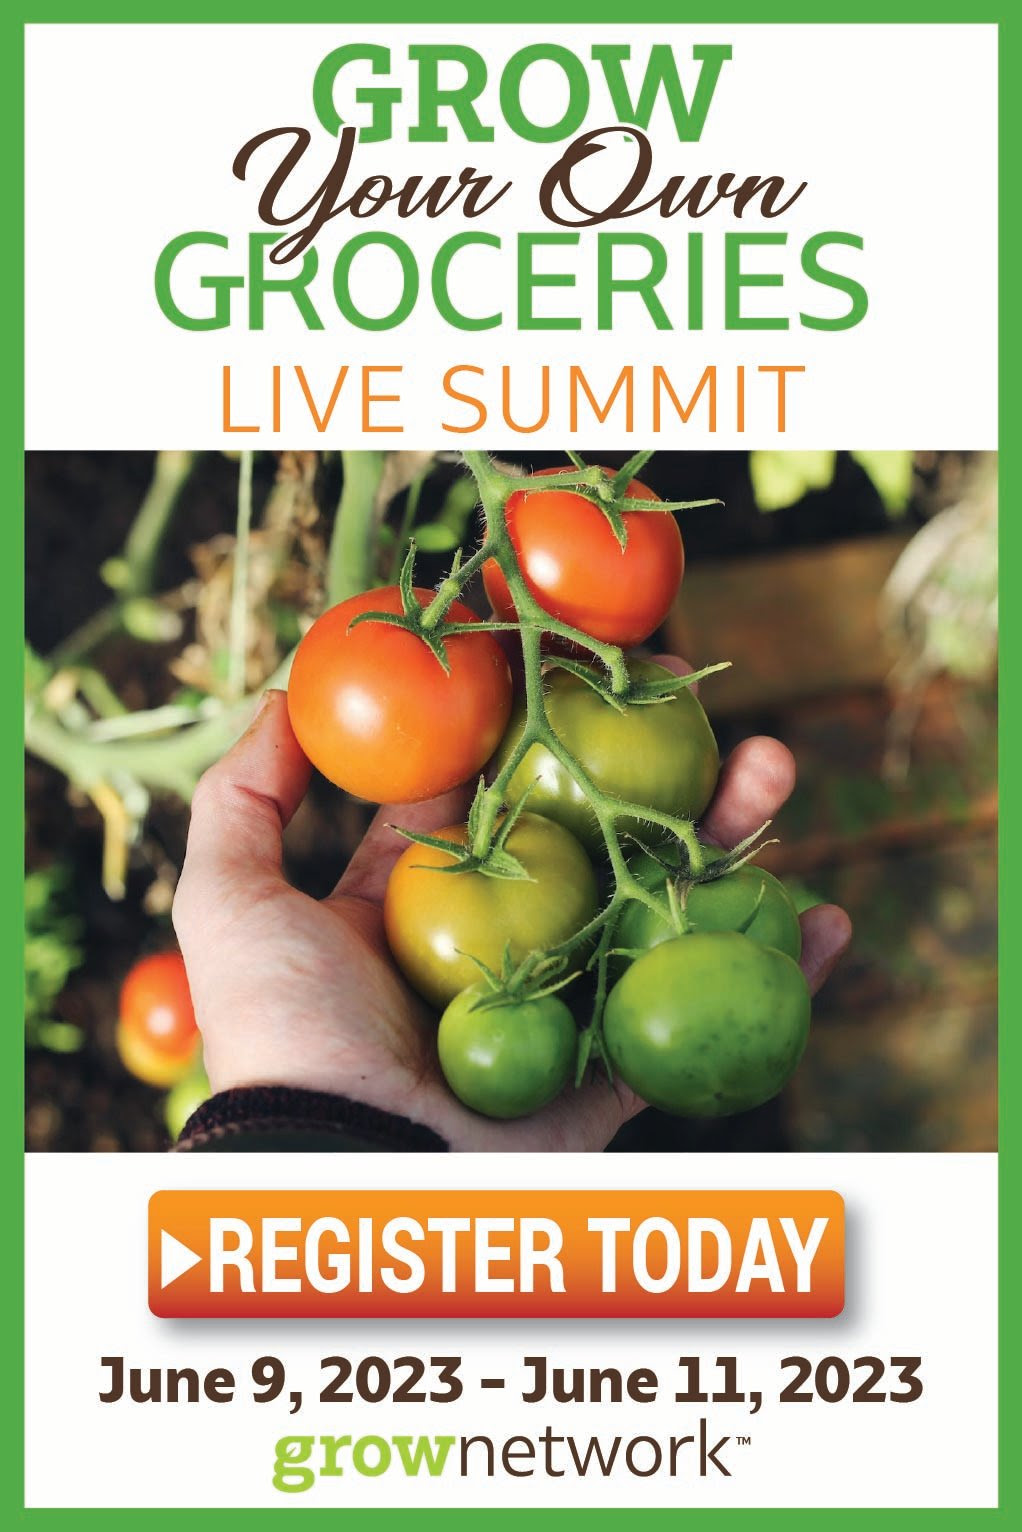 Unleash the Power of Your Green Thumb at the Grow Your Own Groceries Food Summit VKCeg4bbIh